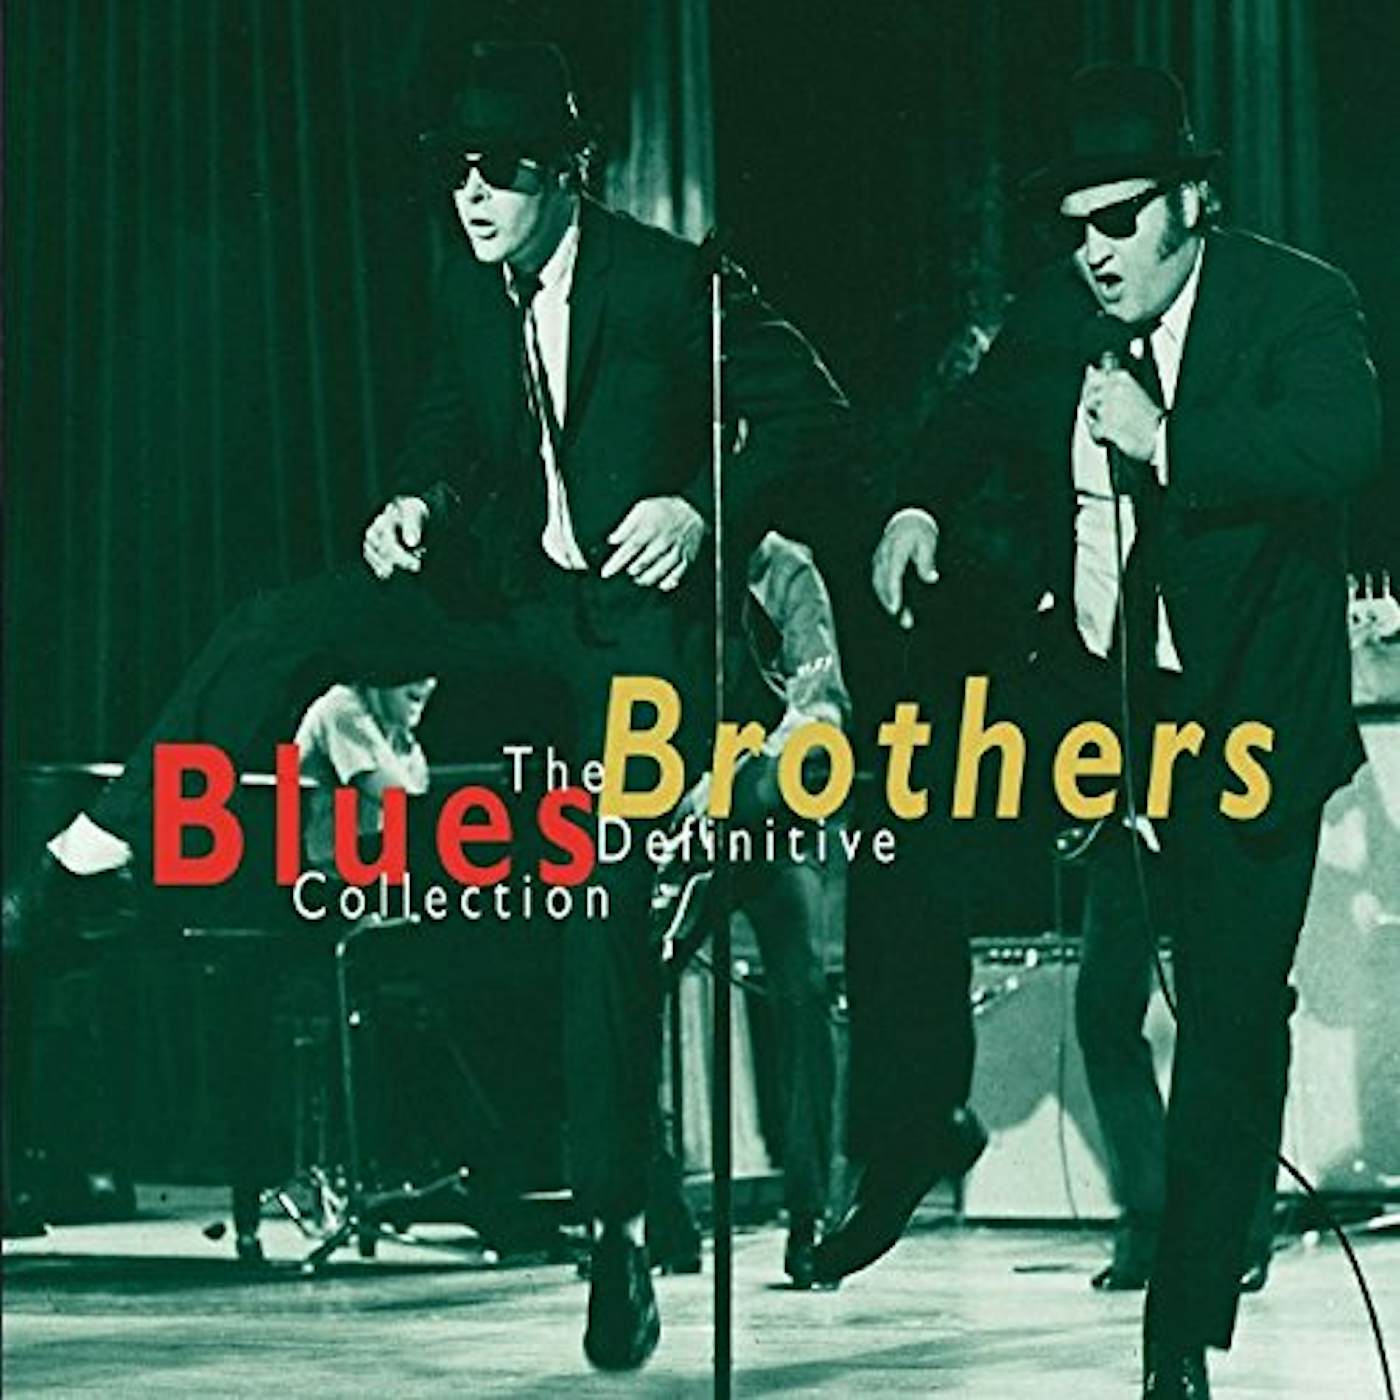 The Blues & Brothers DEFINITIVE COLLECTION CD